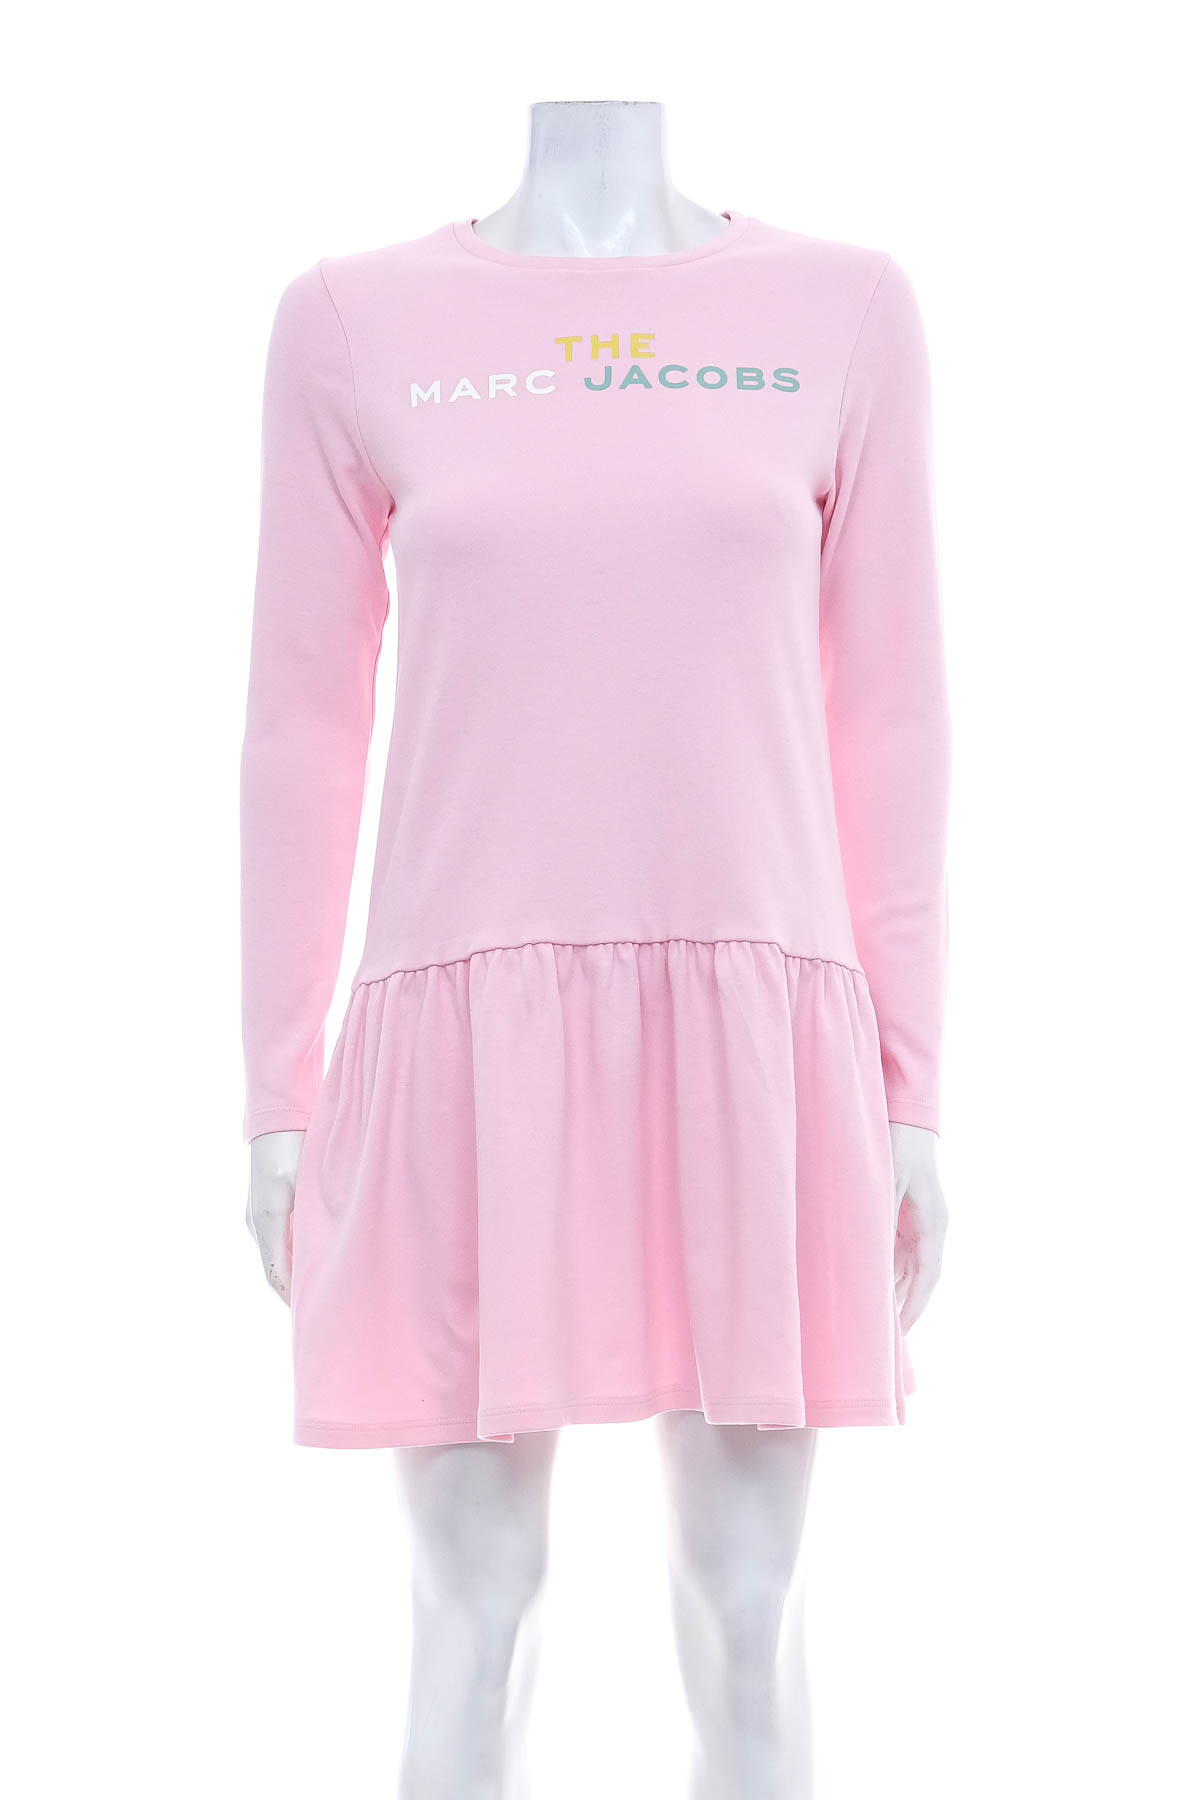 Child's dress - THE MARC JACOBS - 0